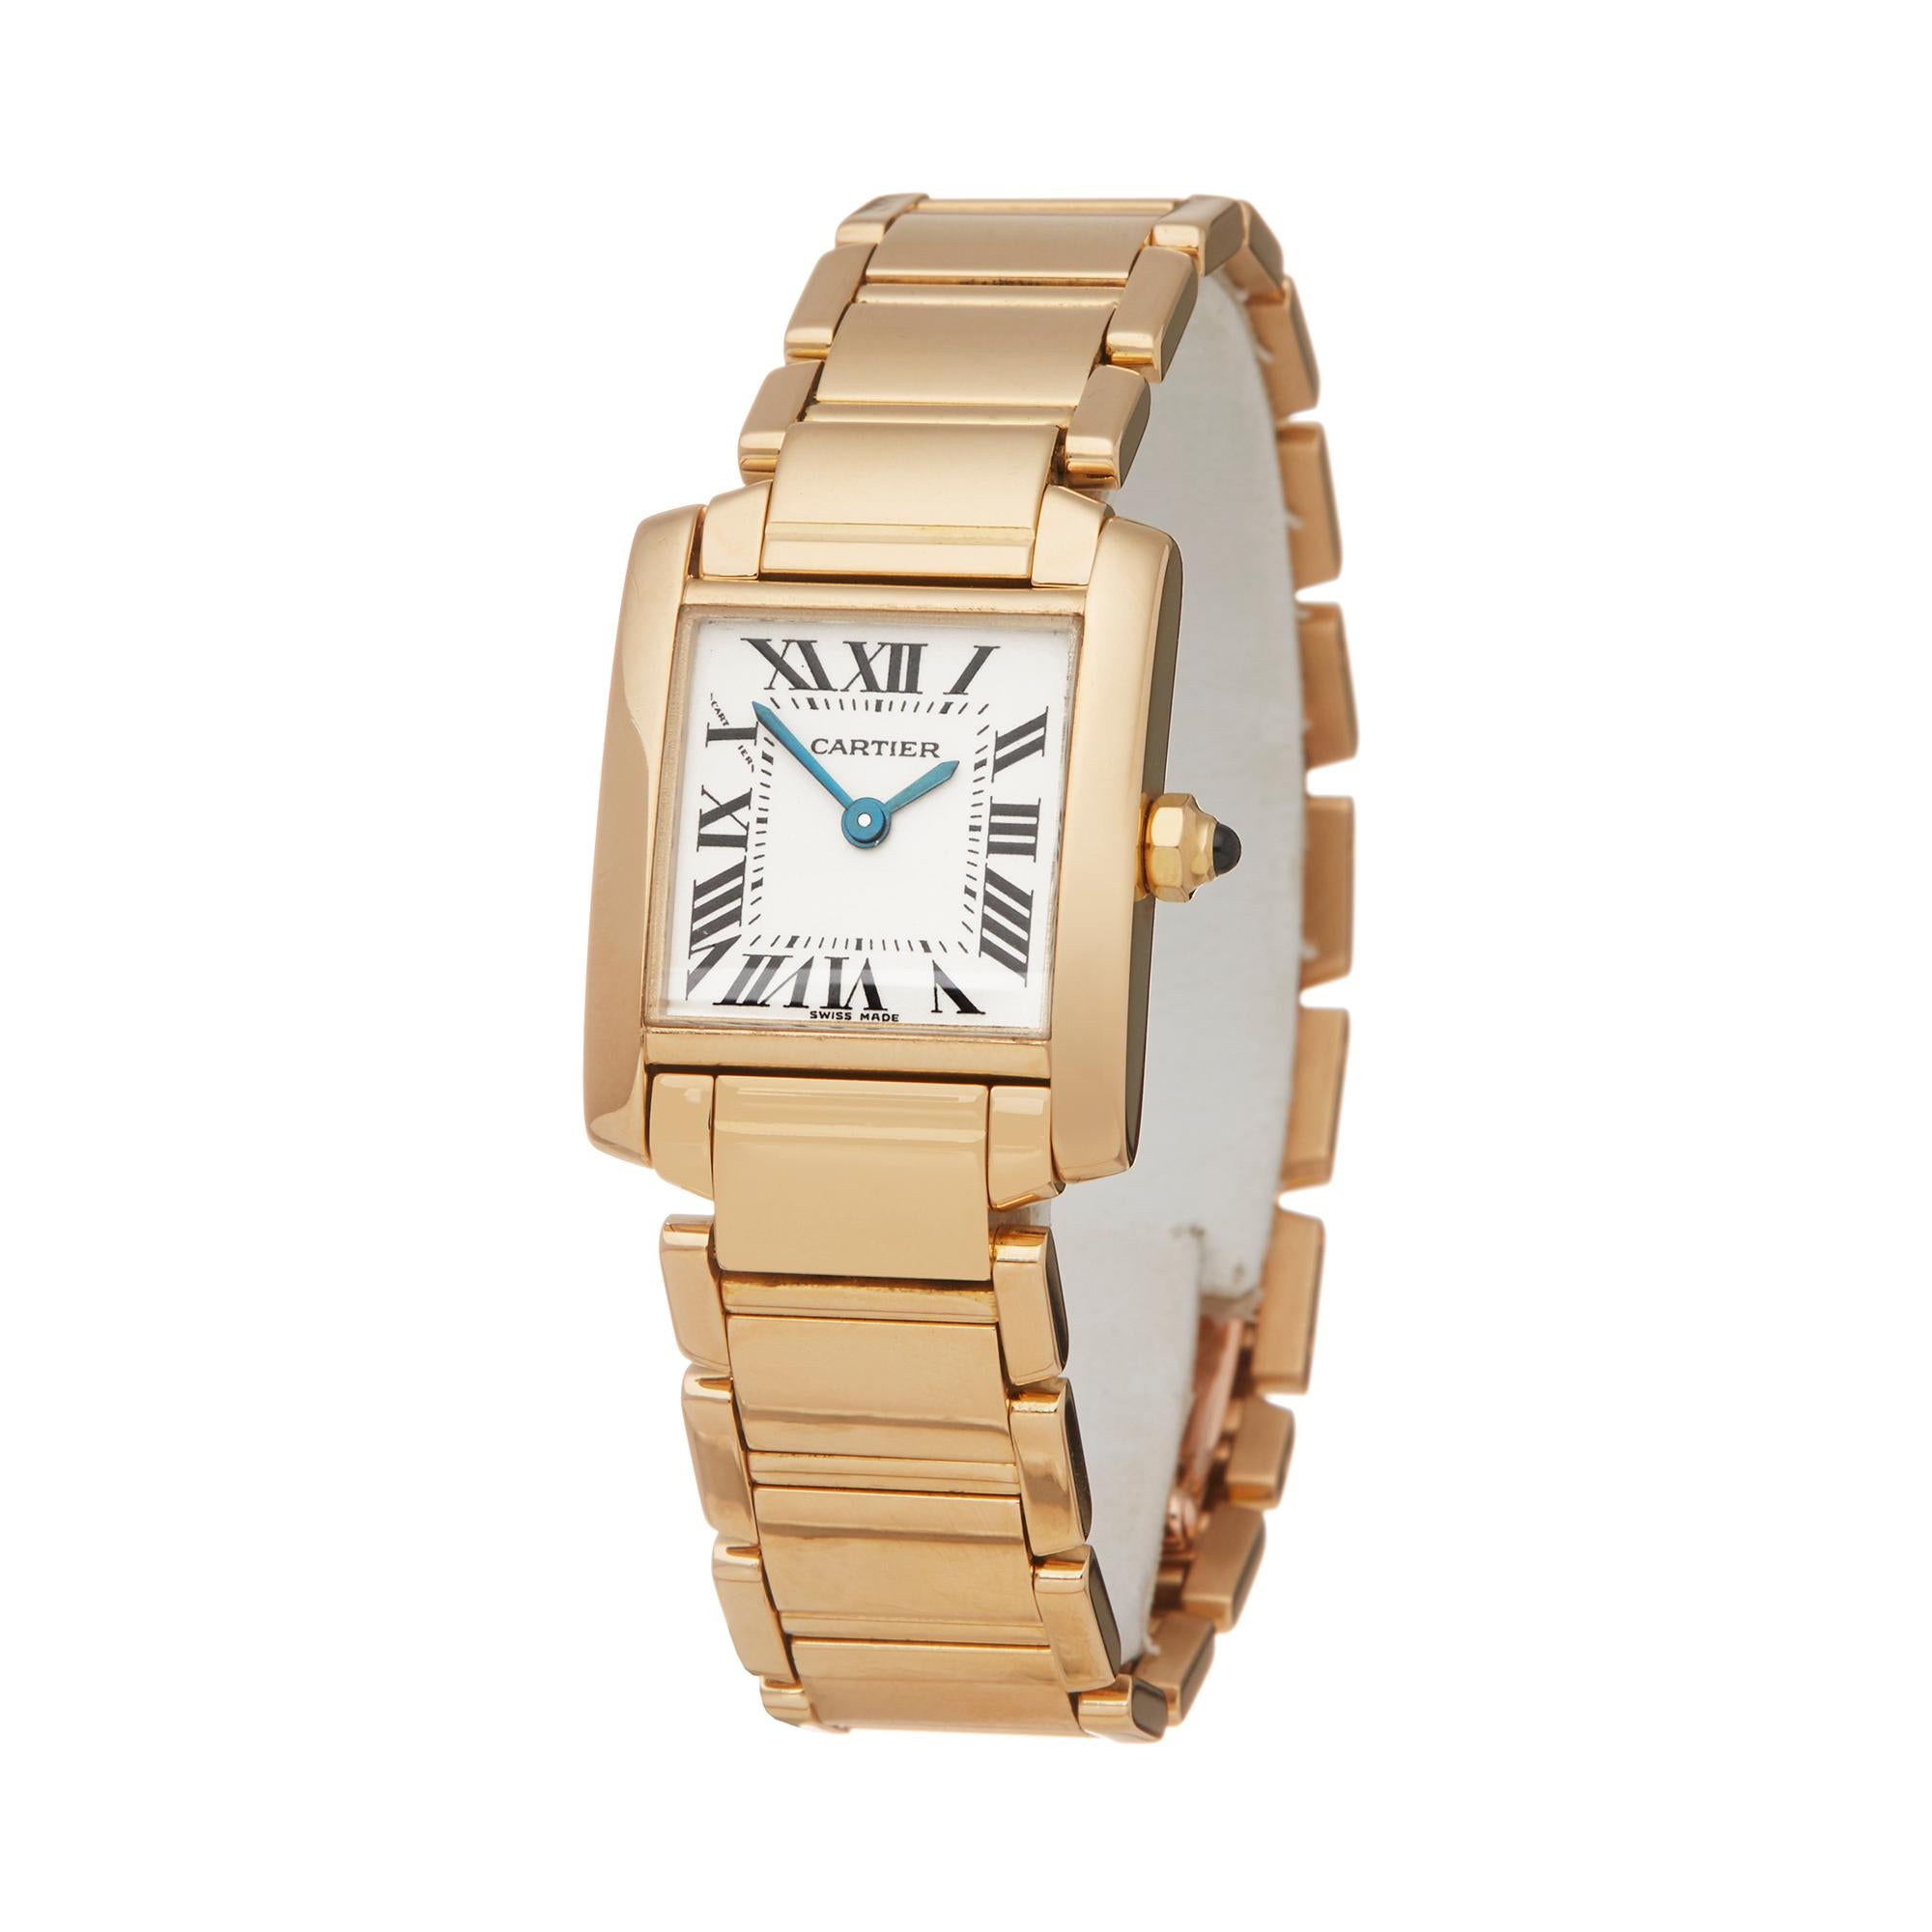 Ref: W5991
Manufacturer: Cartier
Model: Tank
Model Ref: 2385
Age: 24th April 2002
Gender: Ladies
Complete With: Box, Manuals, Guarantee, Cartier Service Pouch & Cartier Service Papers dated 7th March 2019
Dial: White Roman 
Glass: Sapphire